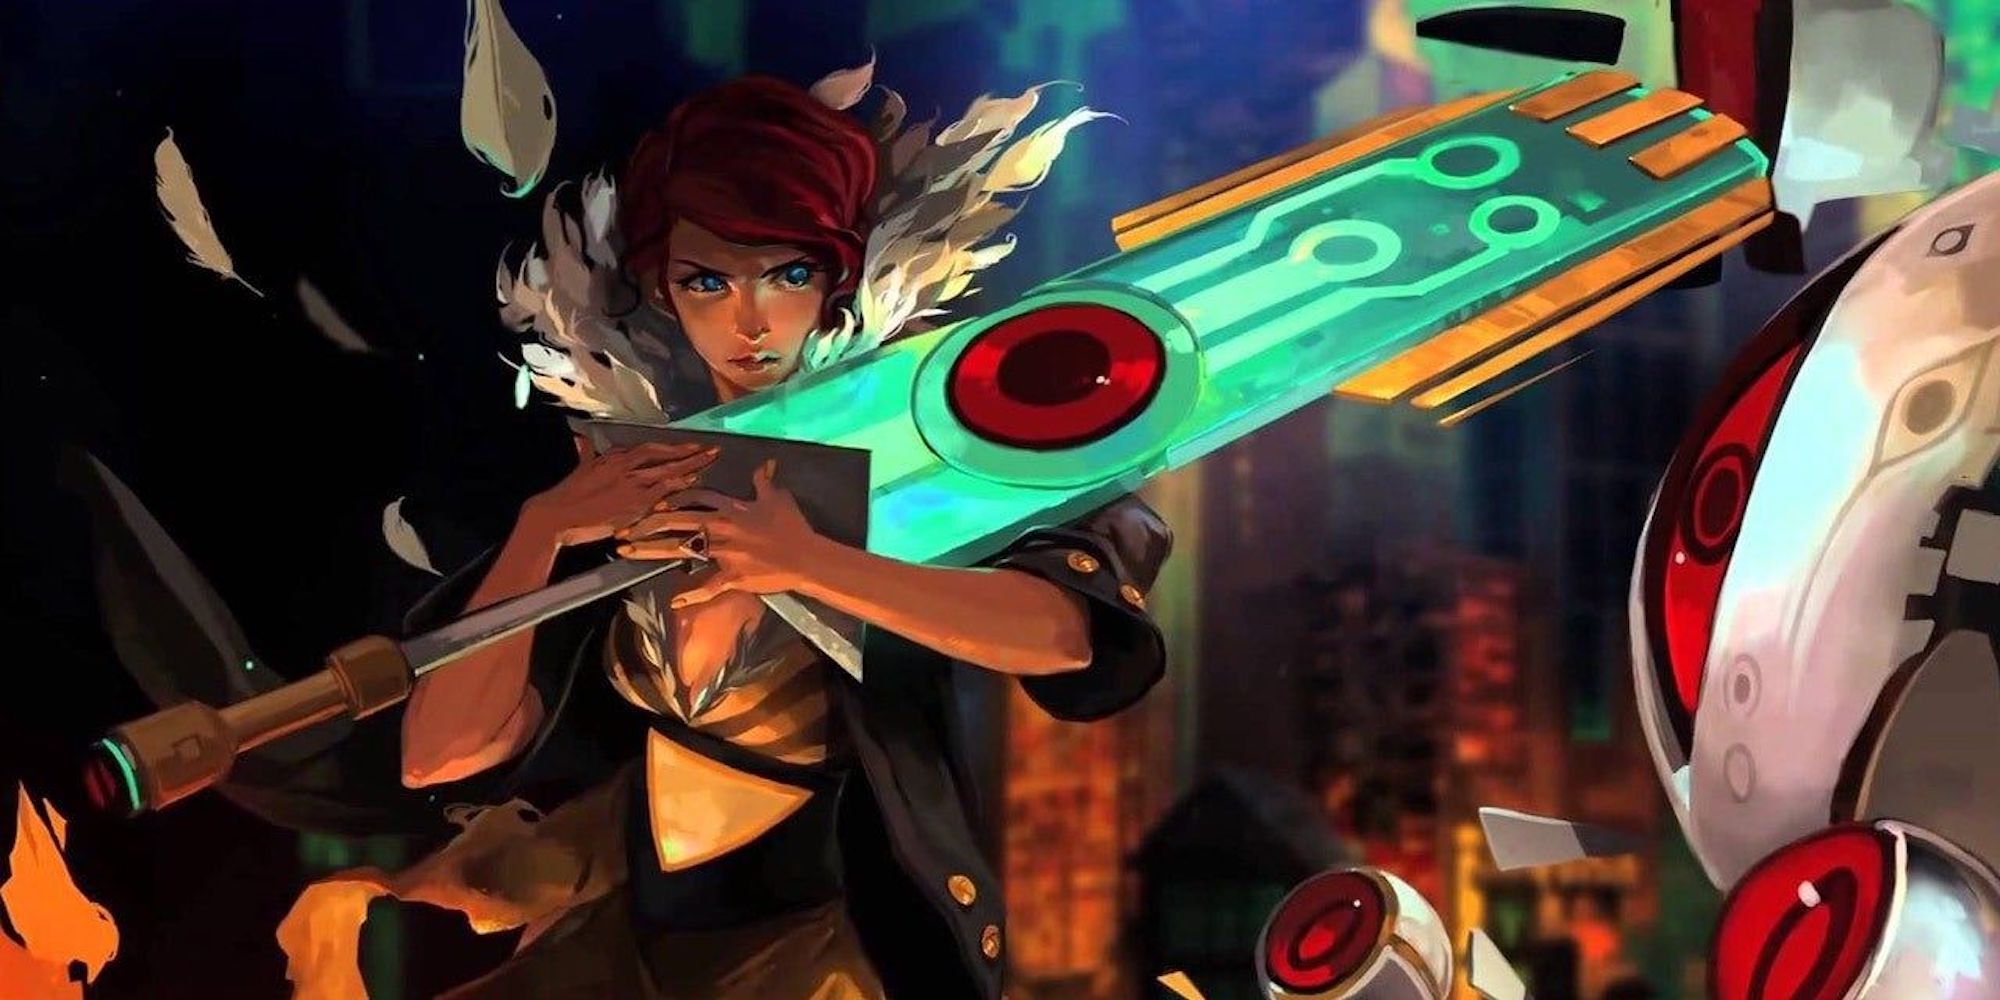 Red holding the sword as eyes stare at her Transistor